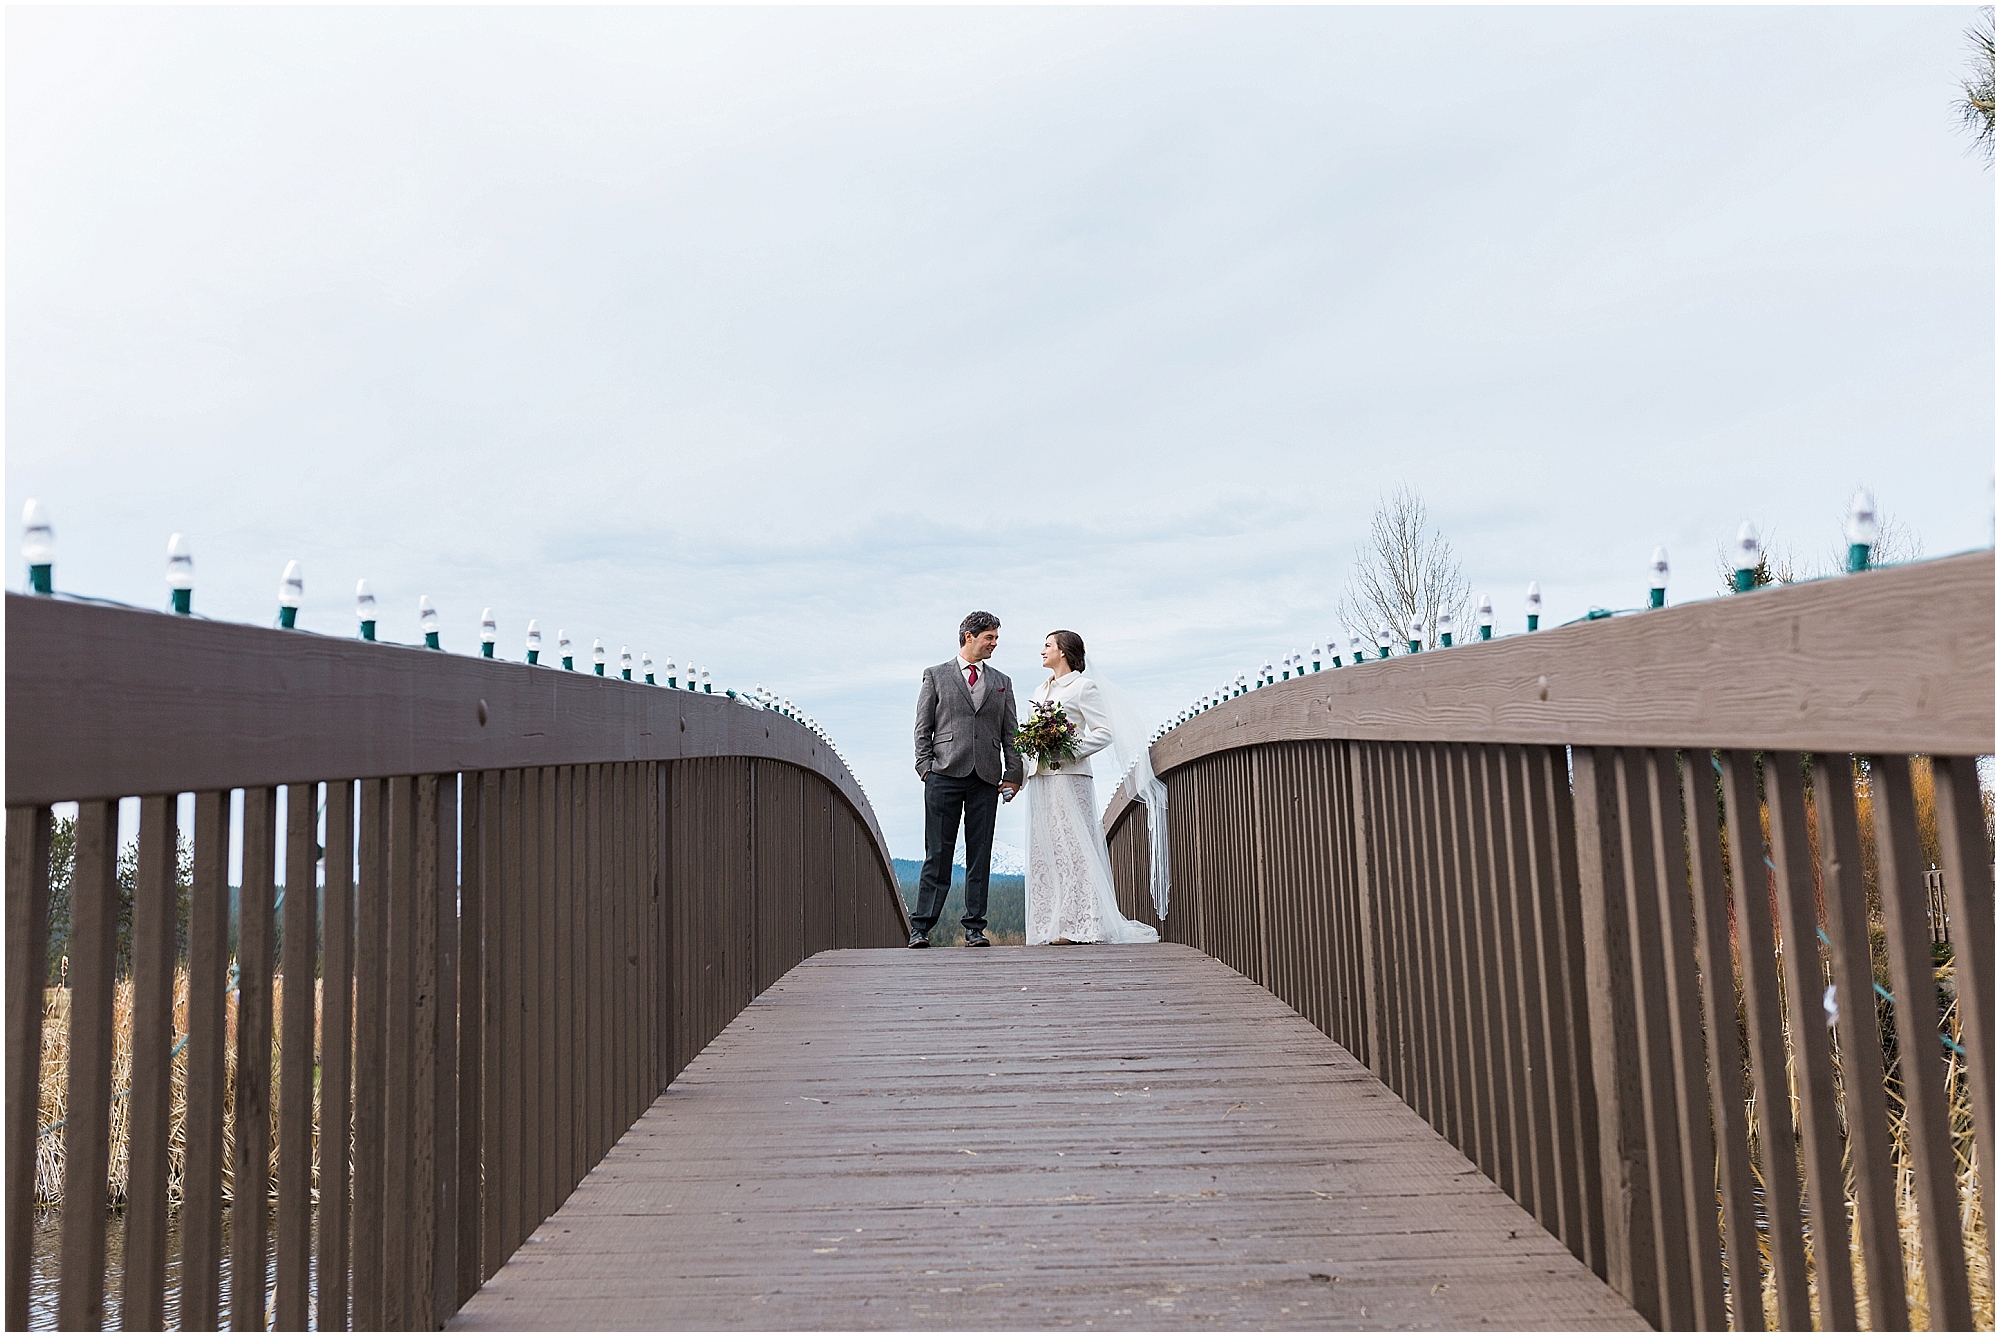 A beautiful bridge over a pond provides an interesting place for a wedding couple's portrait at Sunriver Resort in Oregon. | Erica Swantek Photography